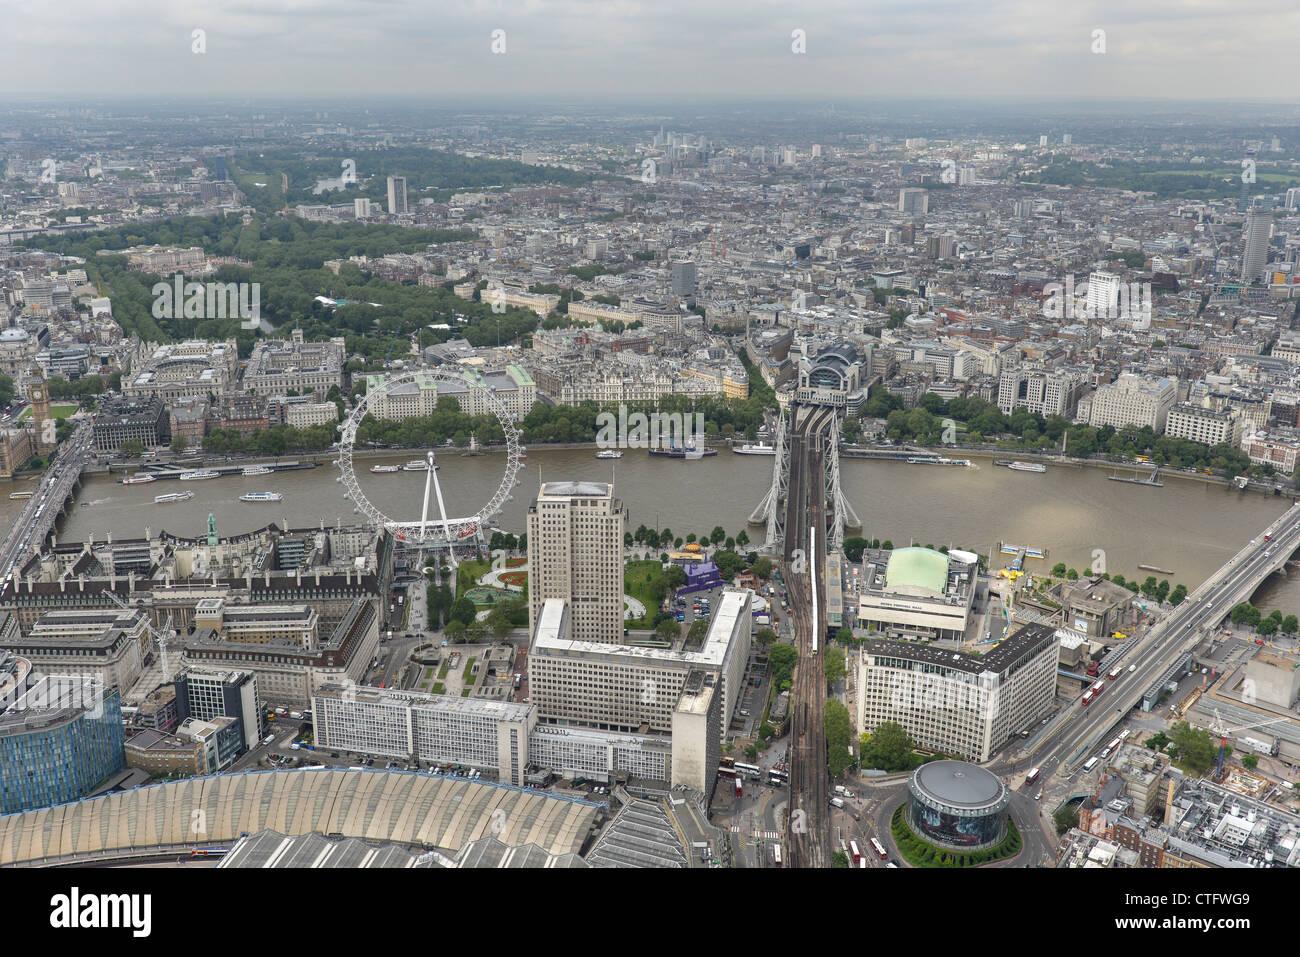 Aerial View of London including River Thames and London Eye Stock Photo